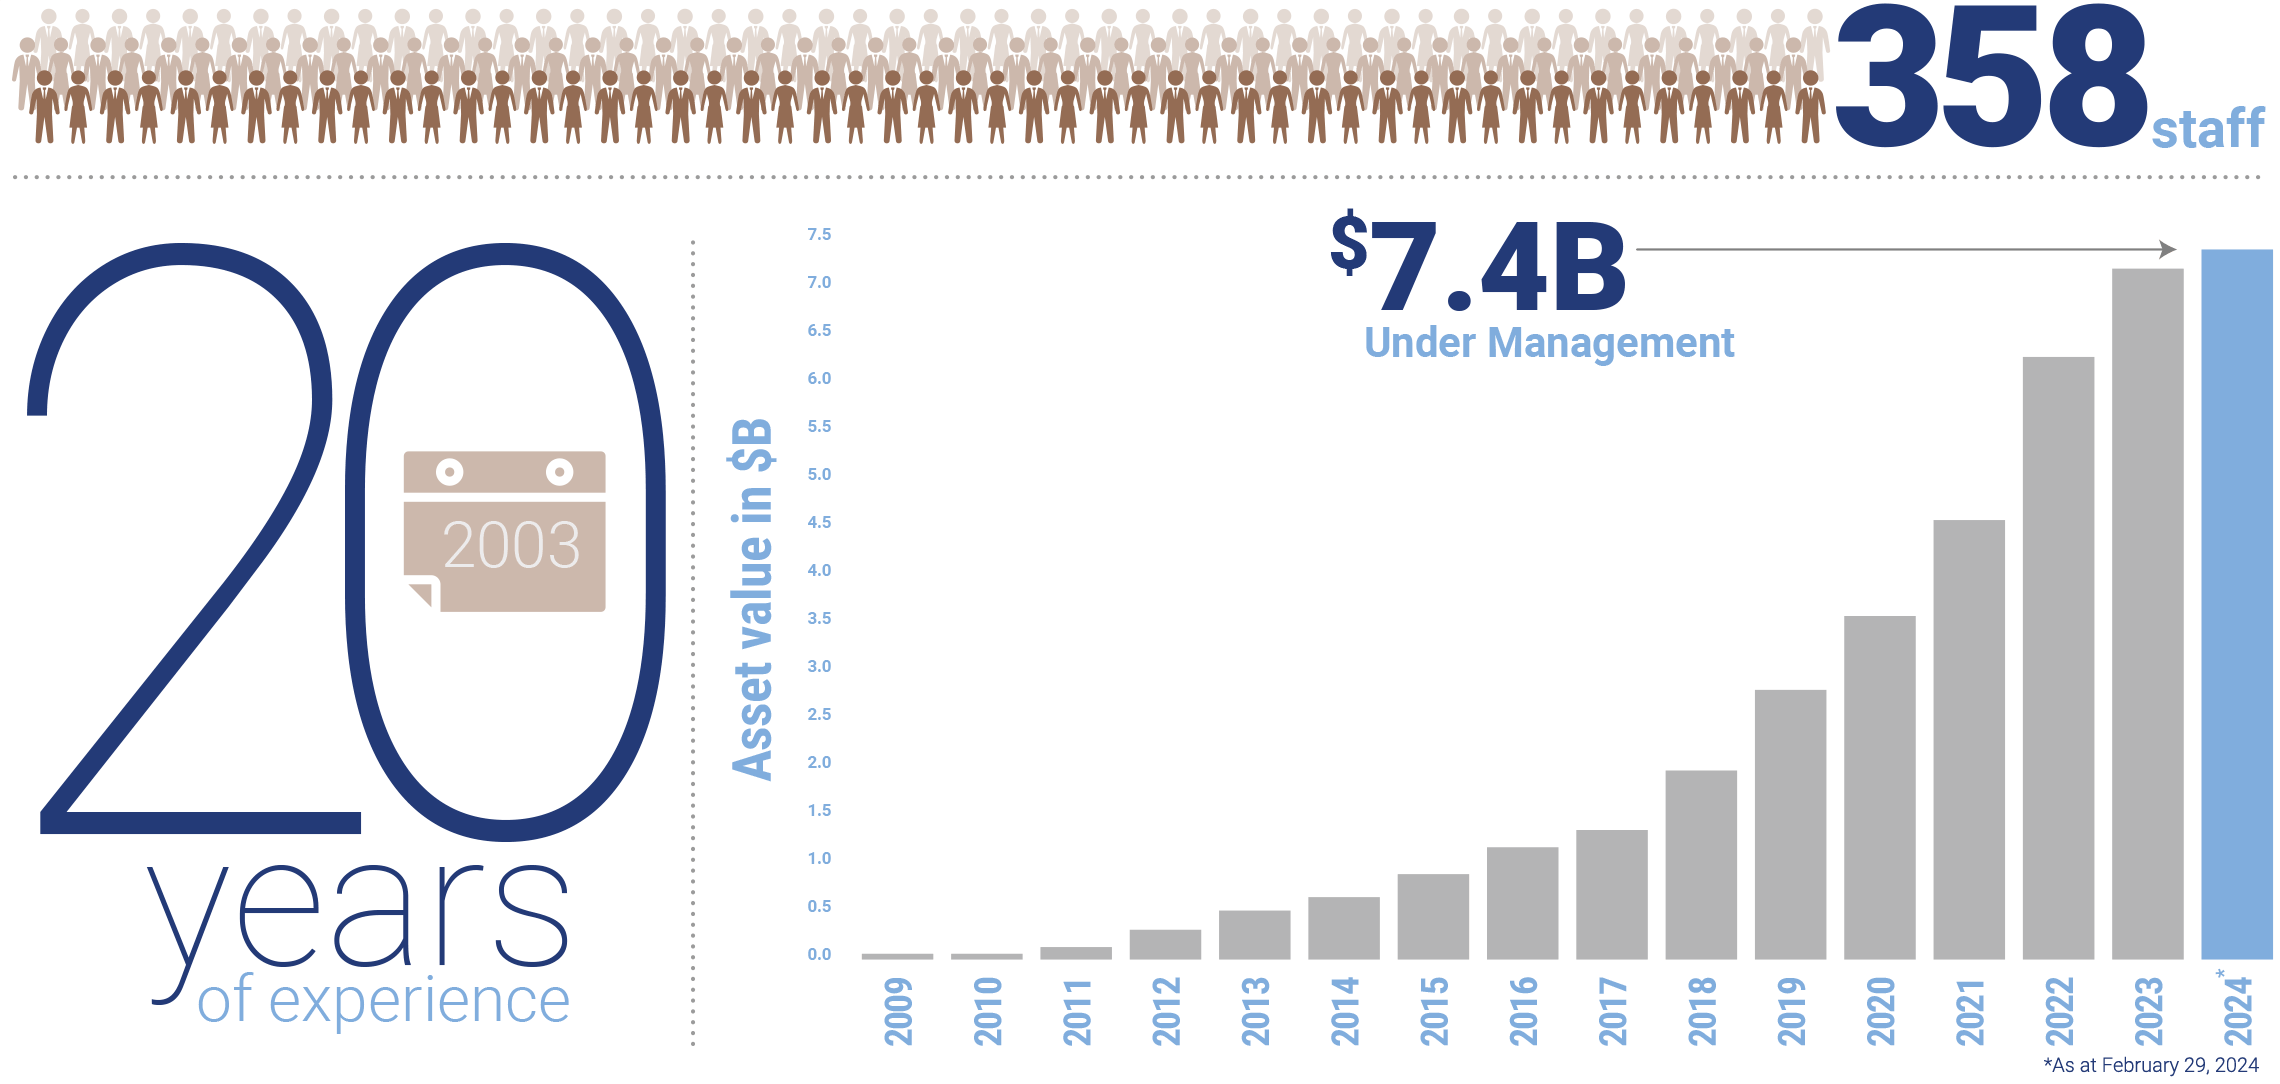 19 years of experience, 295 staff, over $5.8 billion under management as of June 30, 2022